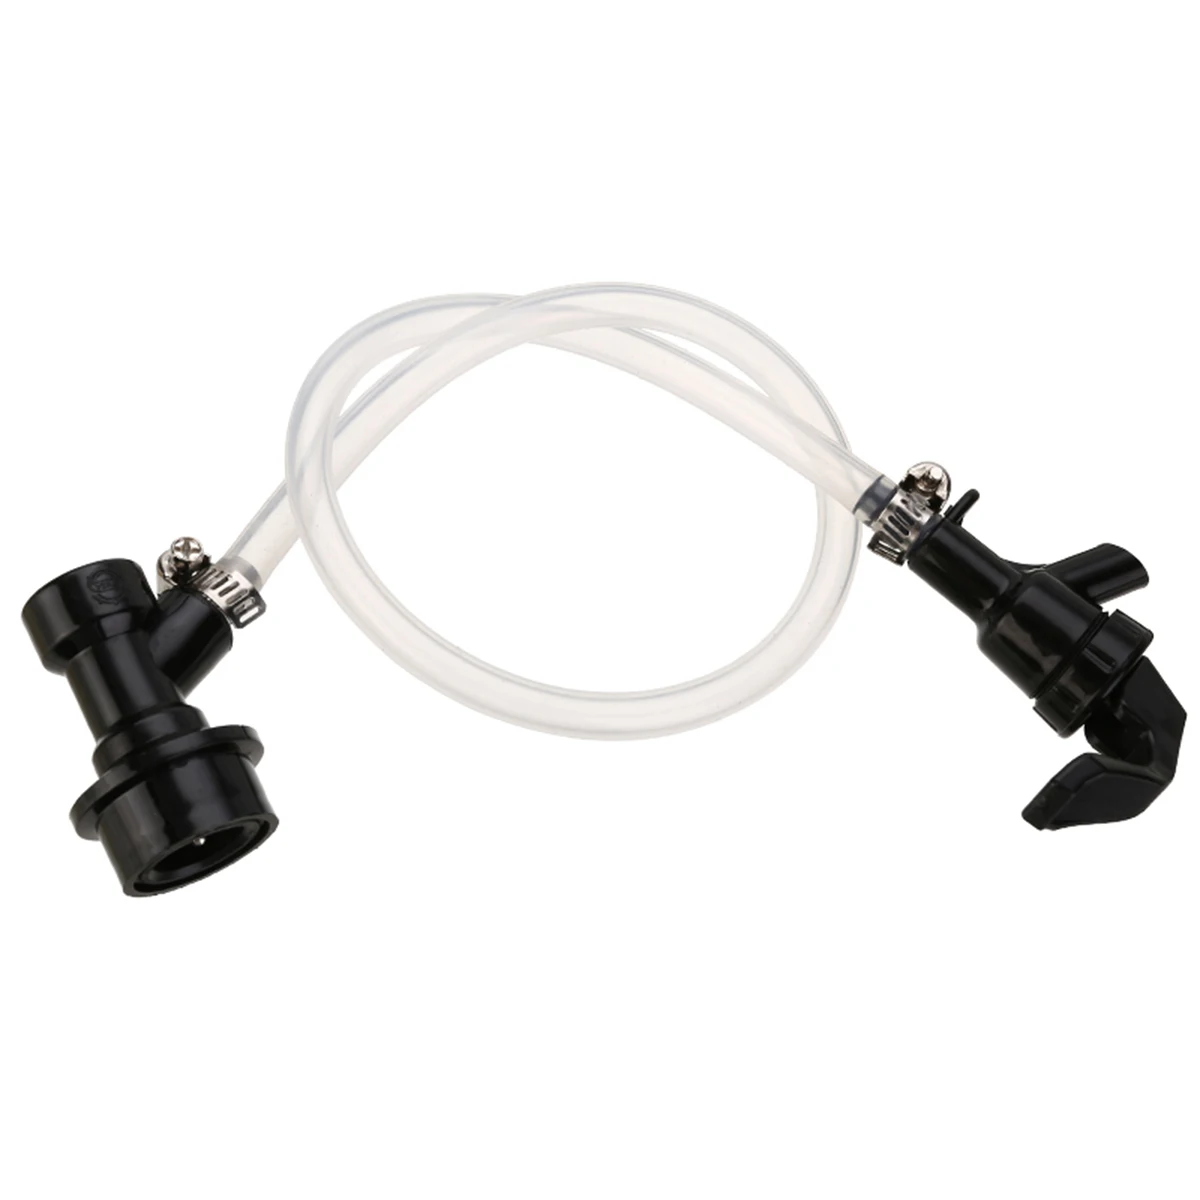 Mayitr 20'' Beer Line with Picnic Tap and Ball Lock Disconnect for Homebrew Keg Home Barware Accessories